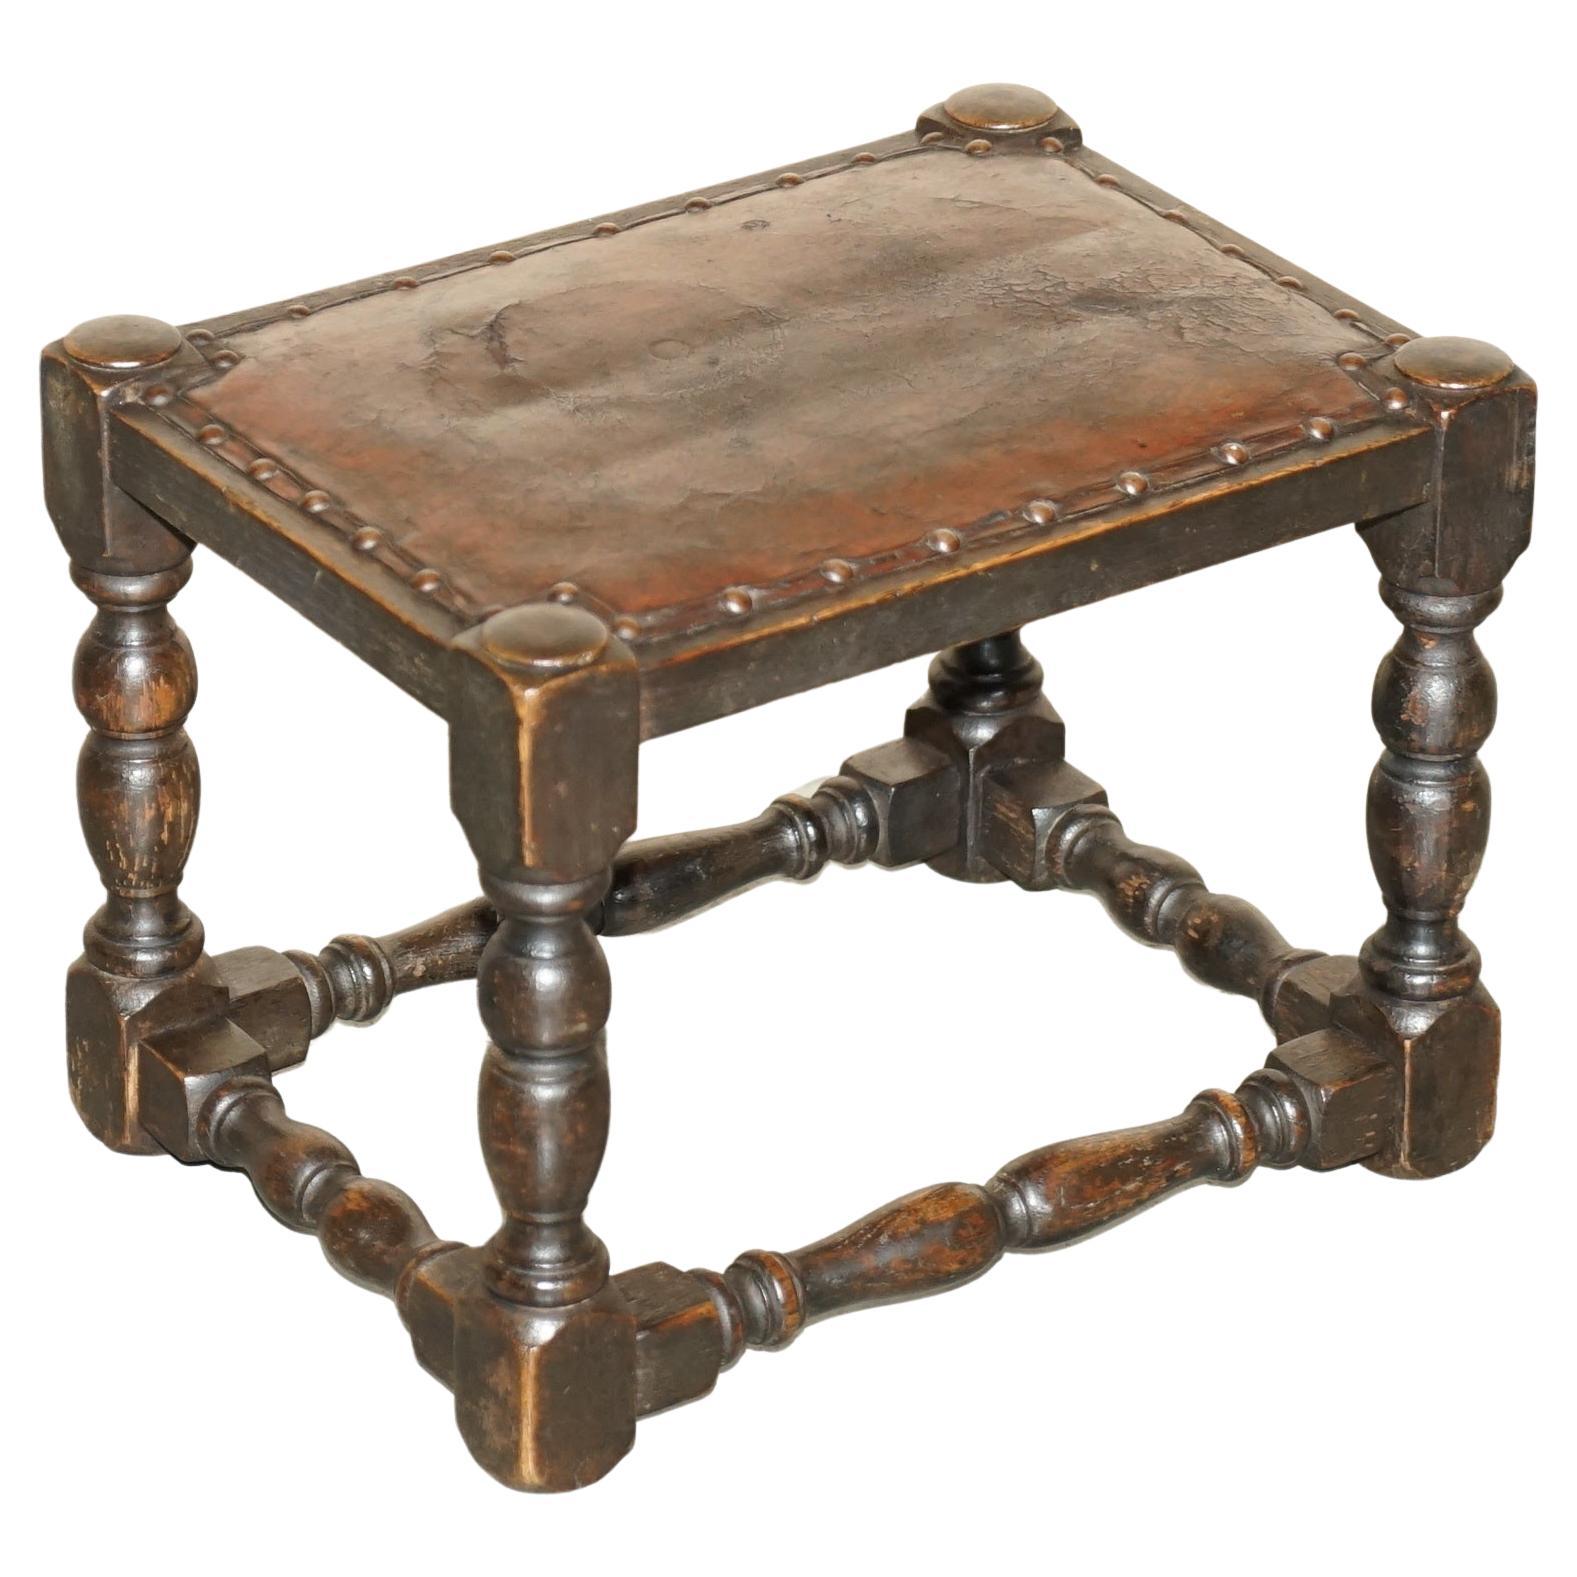 Antique Edwardian Brown Leather & English Oak circa 1900-1910 Small Footstool For Sale